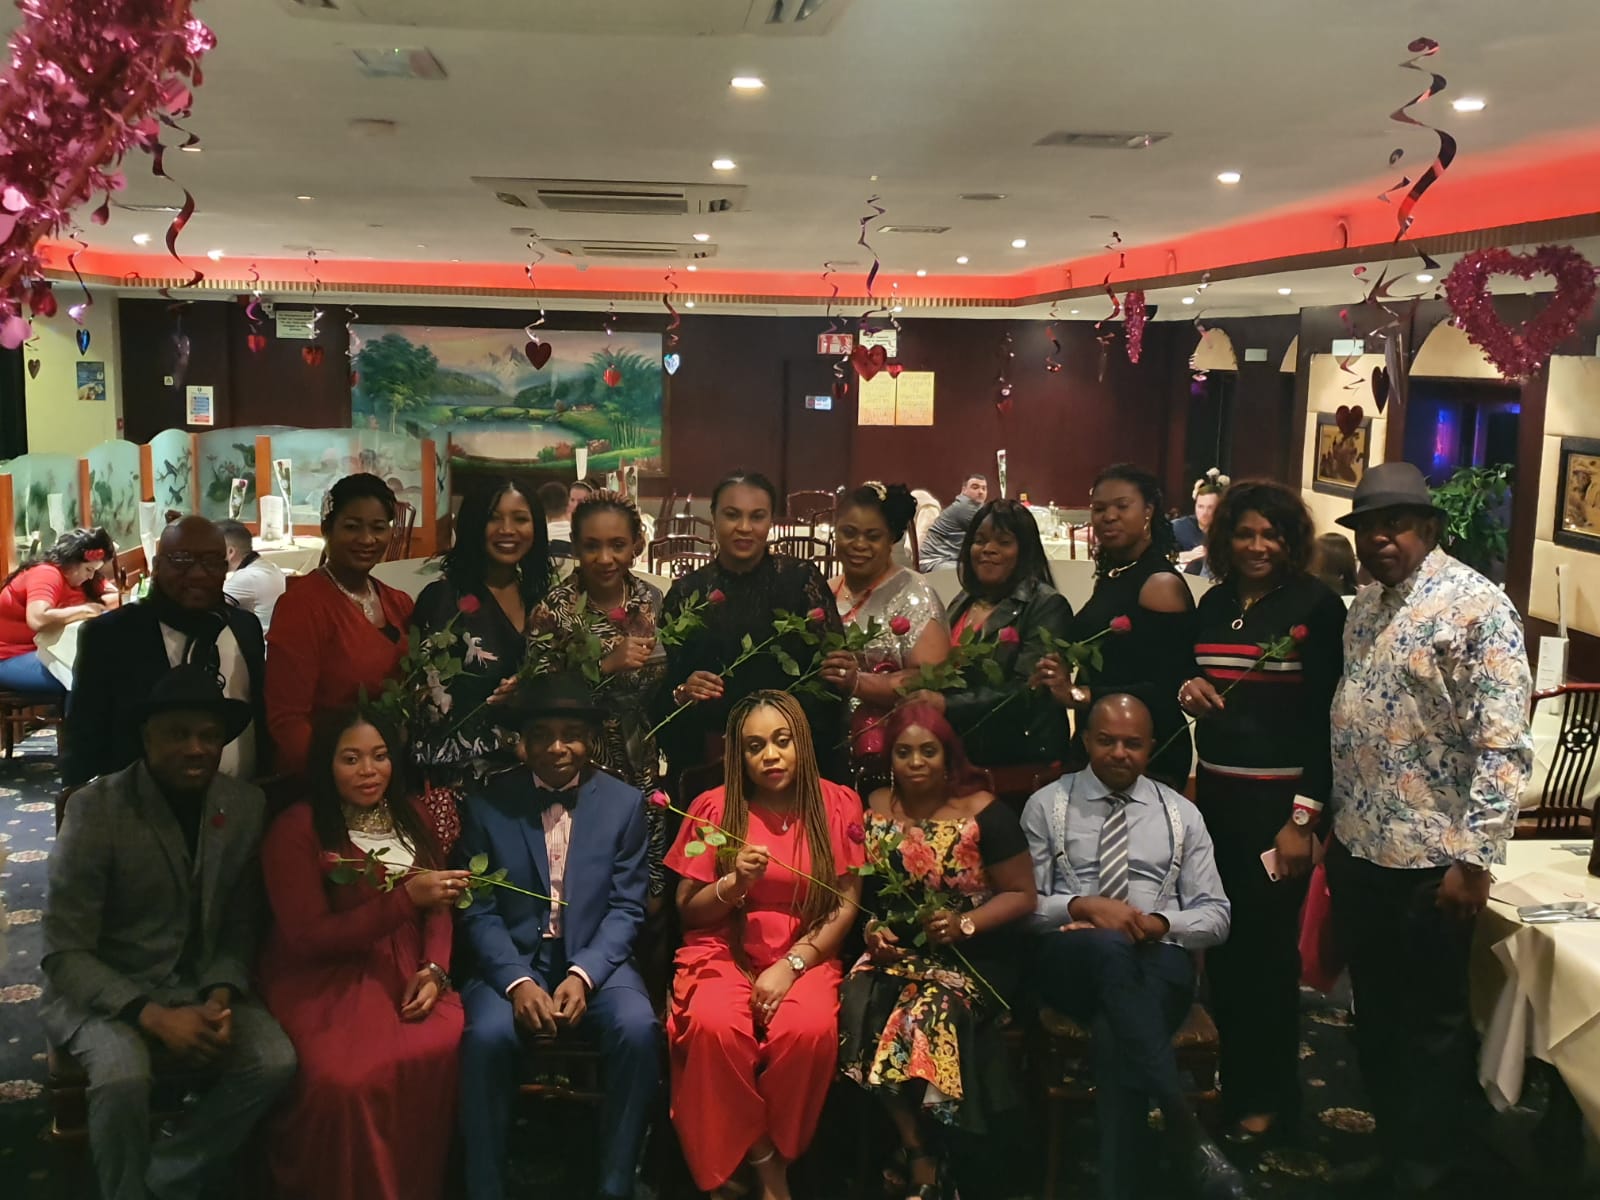 St Valentine’s Day in Dublin: The African Chaplaincy Connection